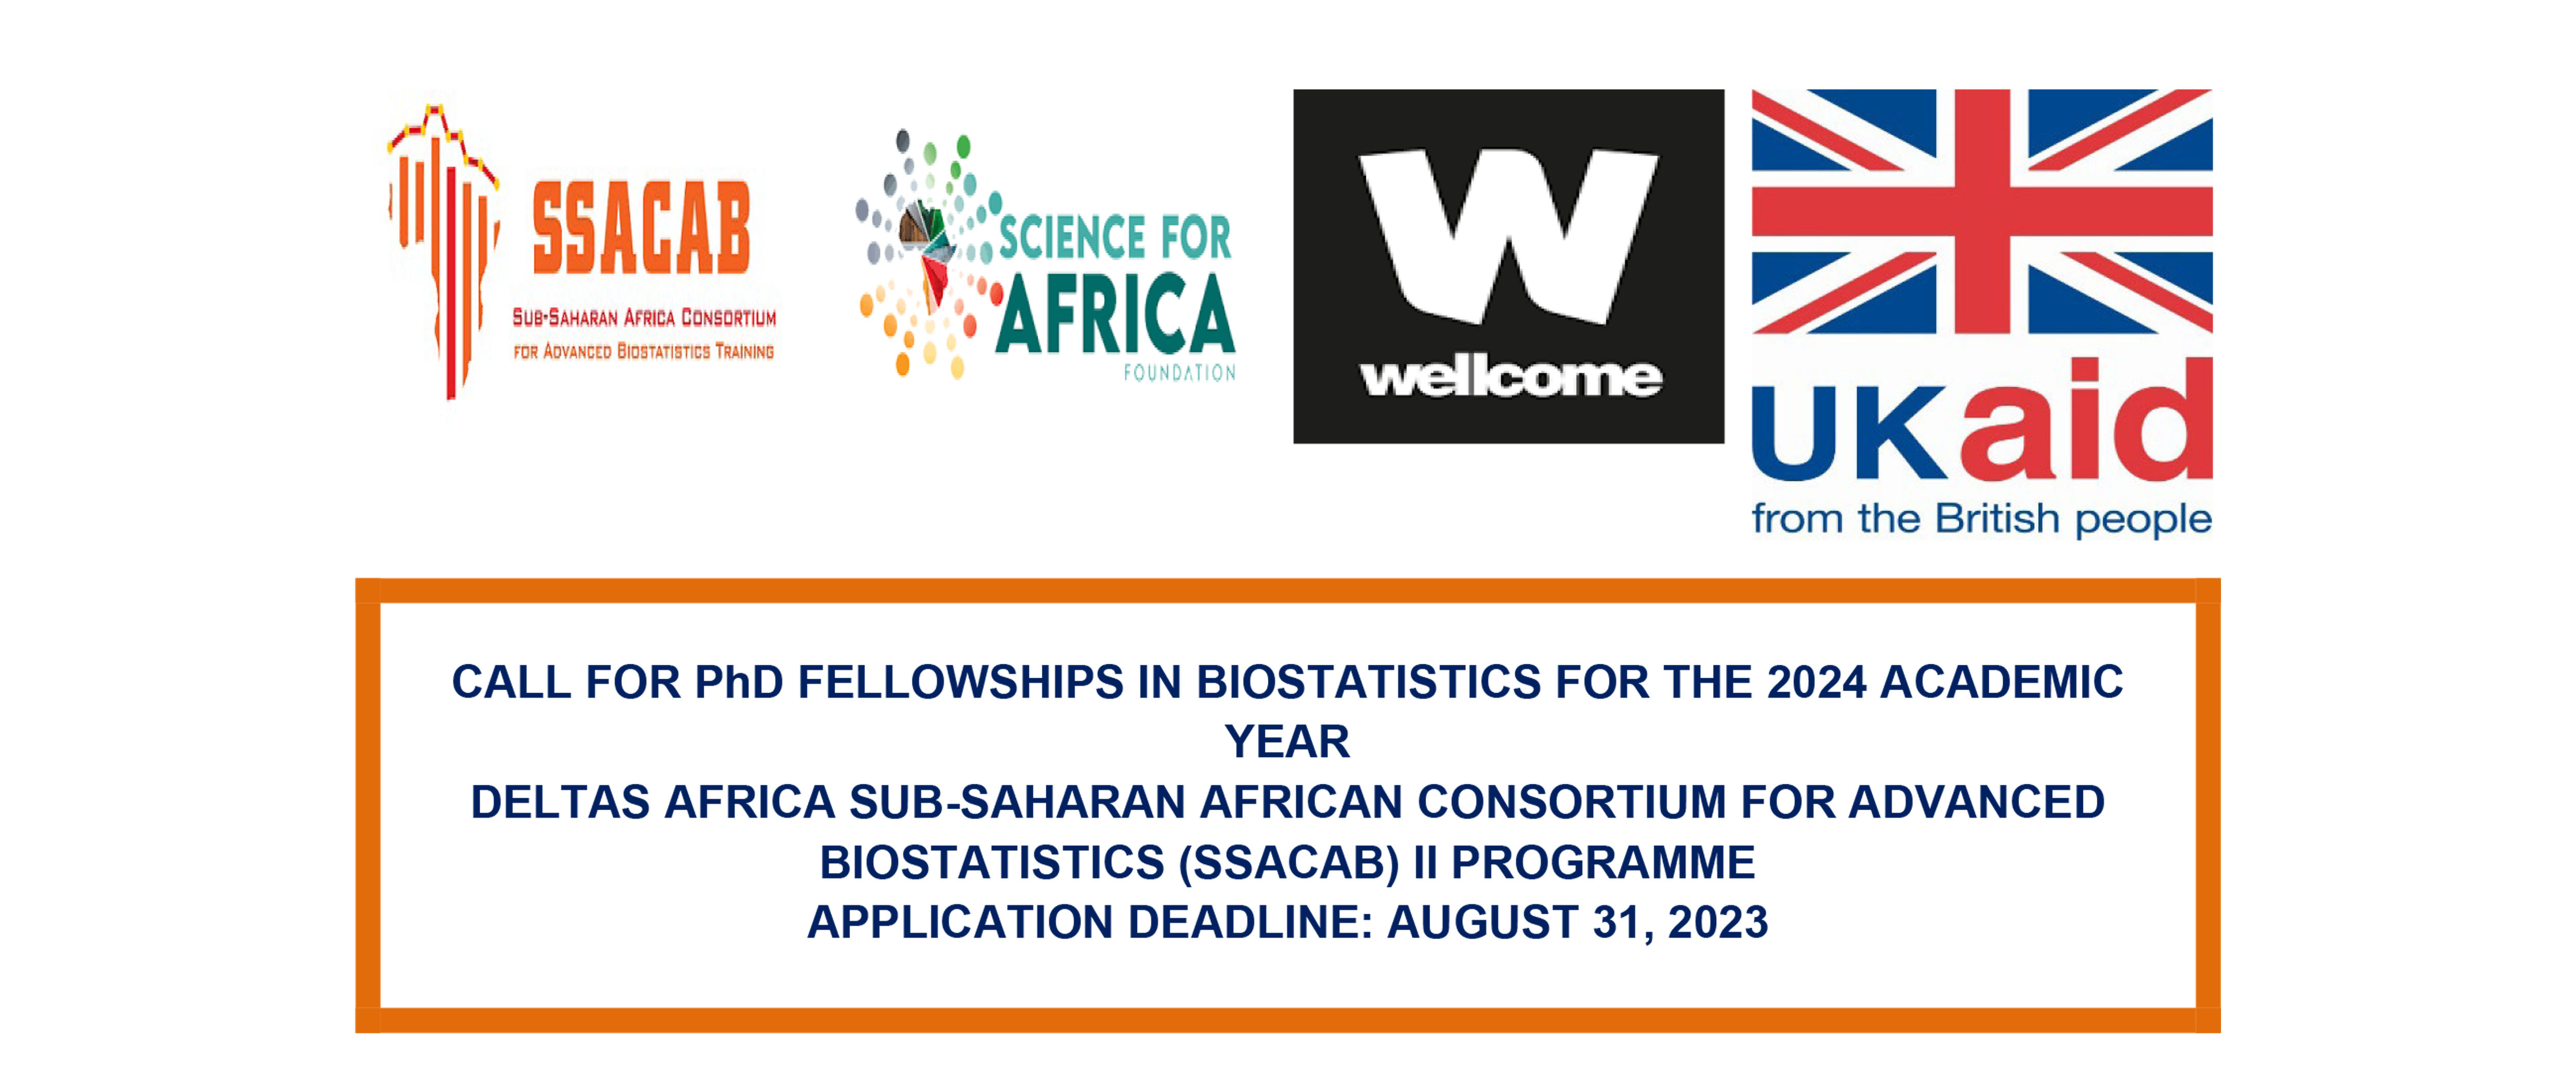 Call for Abstracts in Epidemiology and Biostatistics